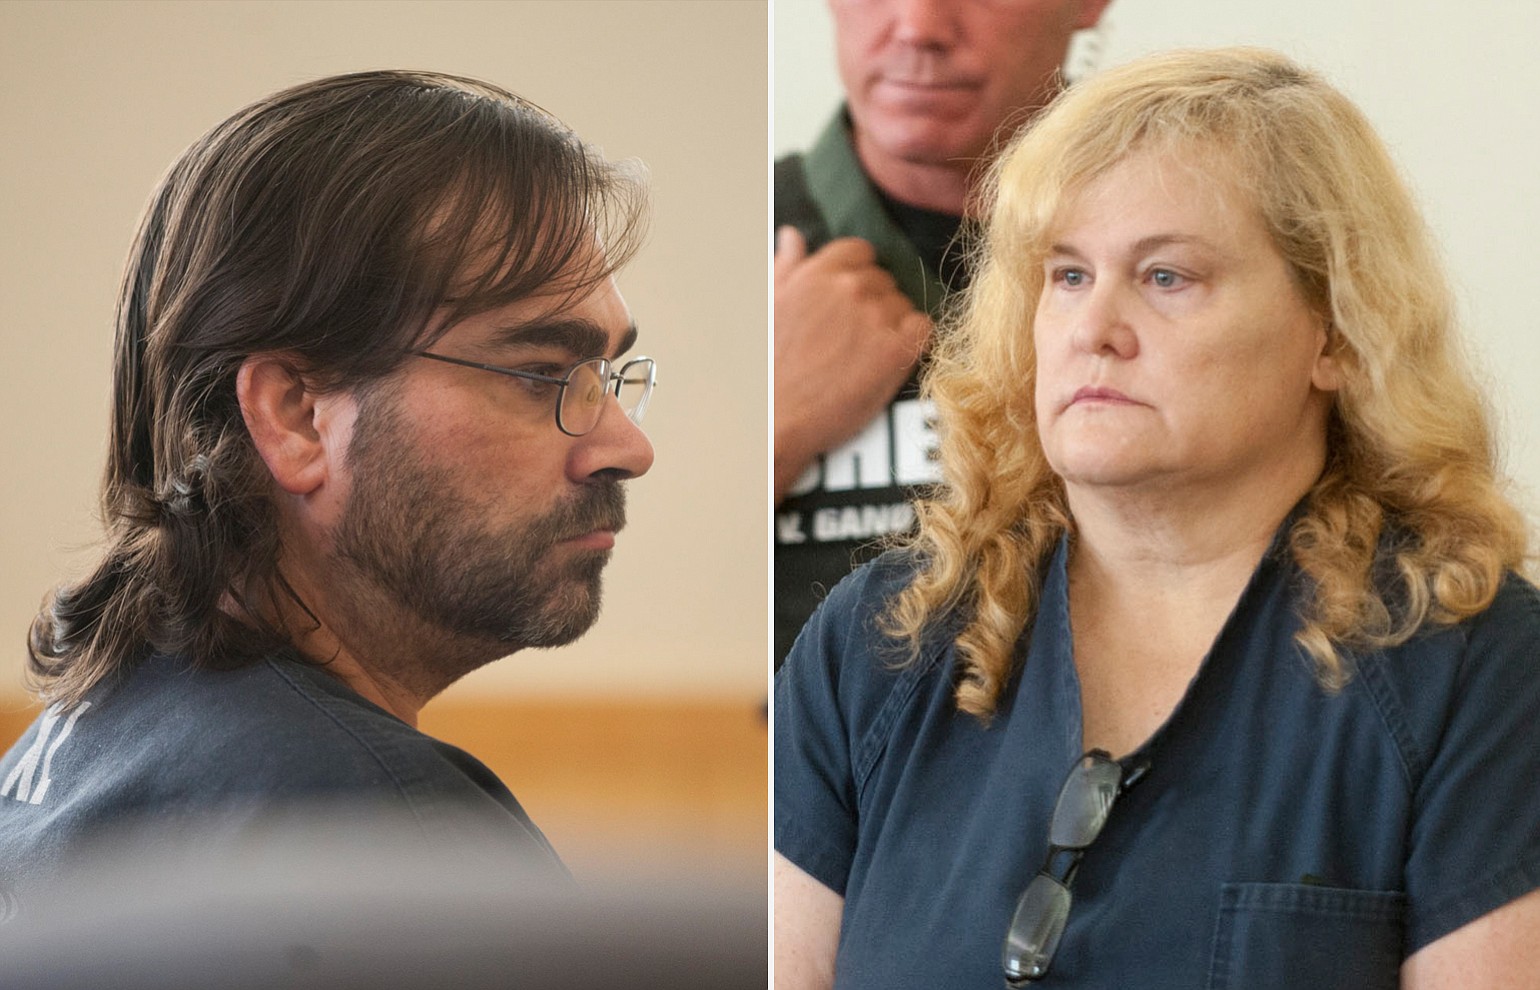 Jeffrey and Sandra Weller appeared in Clark County Superior Court on Thursday for resentencing.